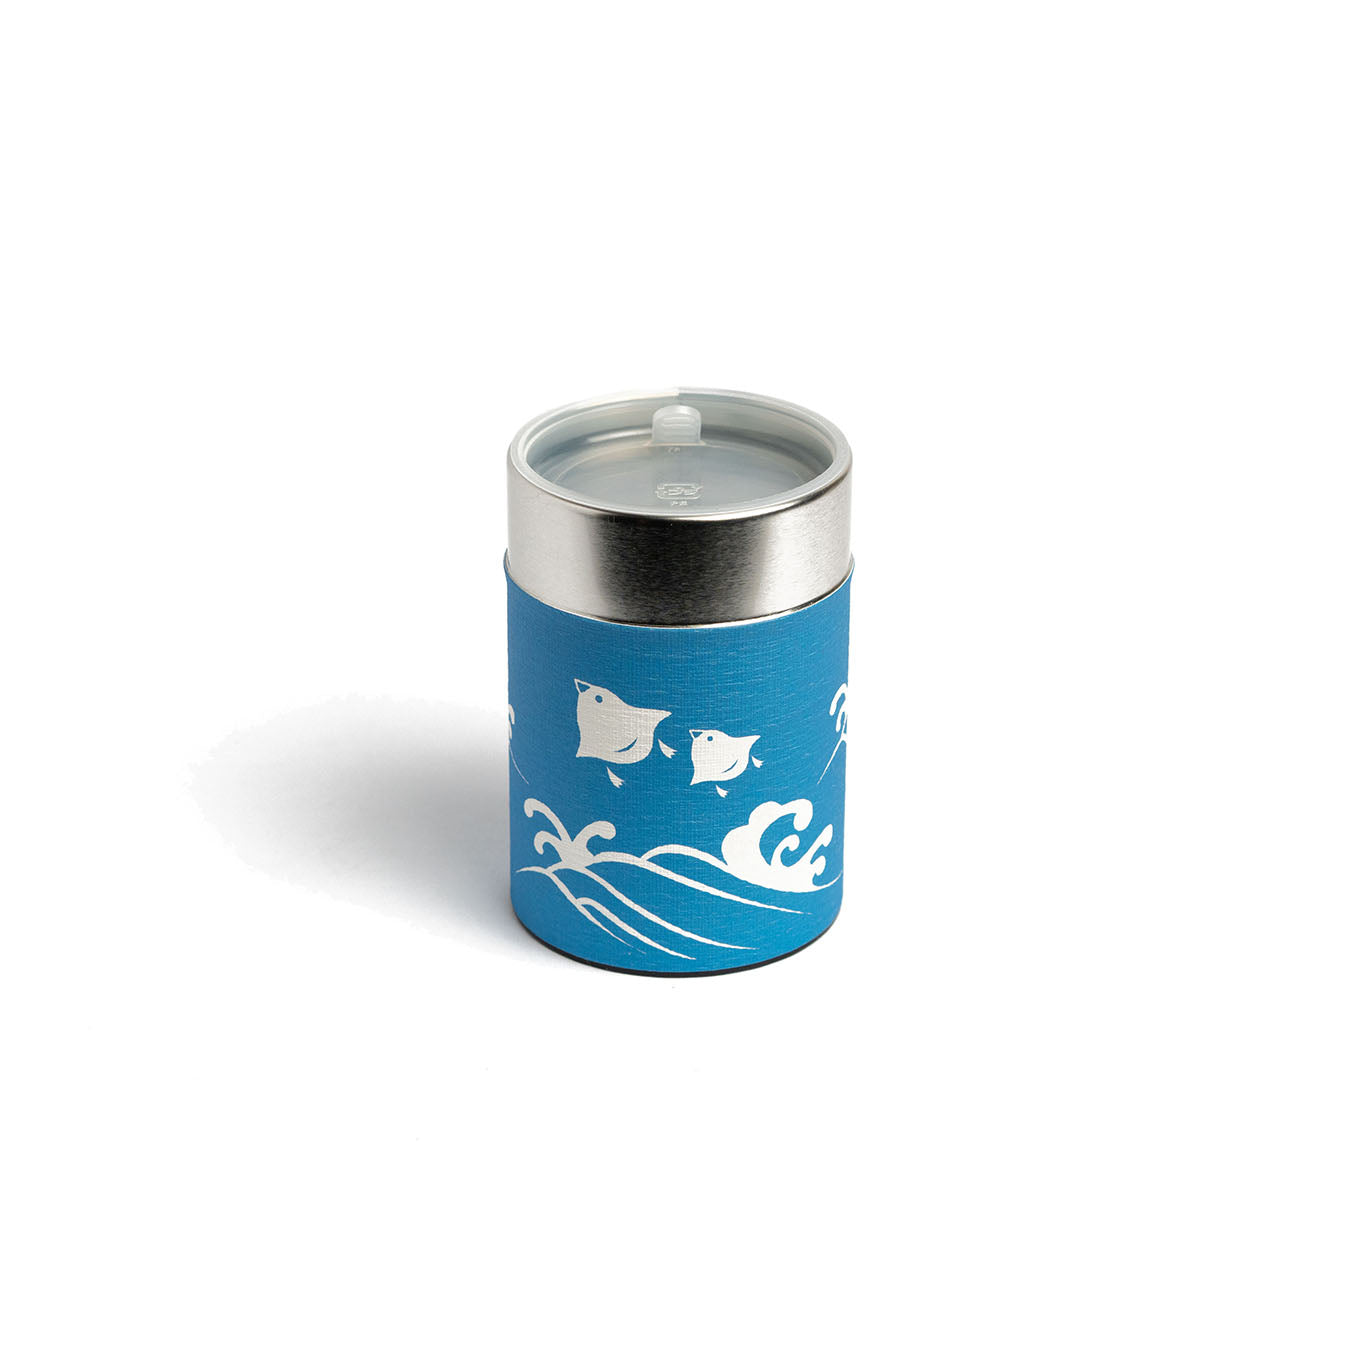 GUSTA SUPPLIES Japanese Tea Can with Poly Internal Lid, Seagulls